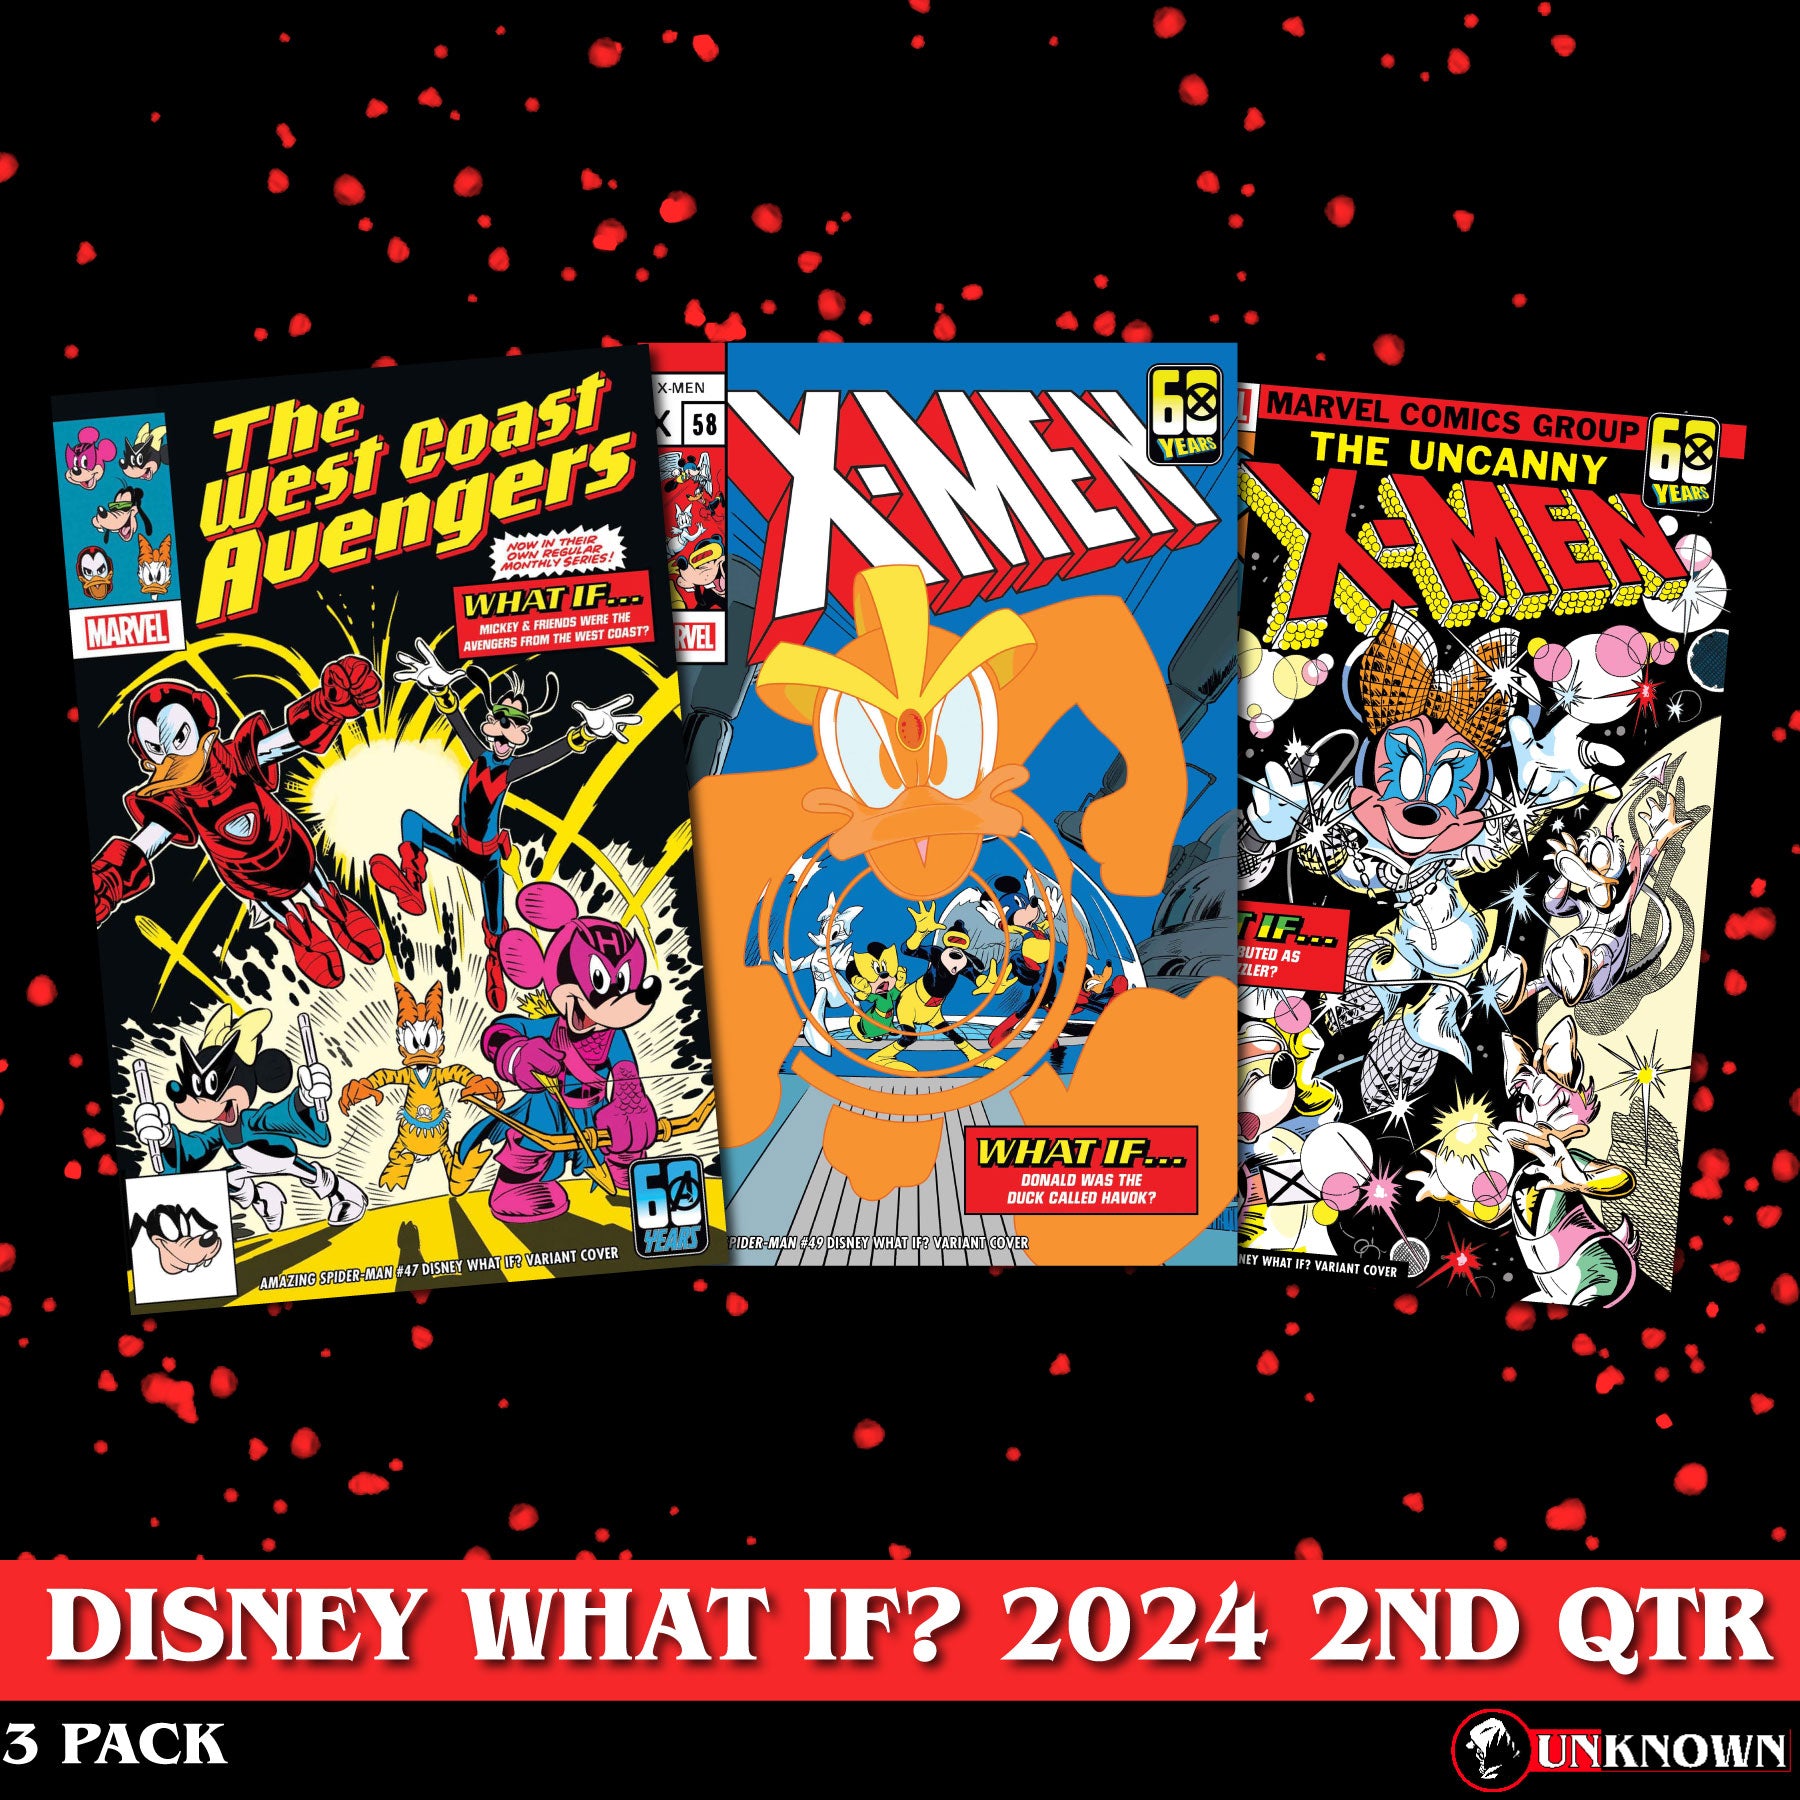 [3 PACK] AMAZING SPIDER-MAN #47, #49, #51 DISNEY WHAT IF? VAR 2ND QTR (06/05/2024)